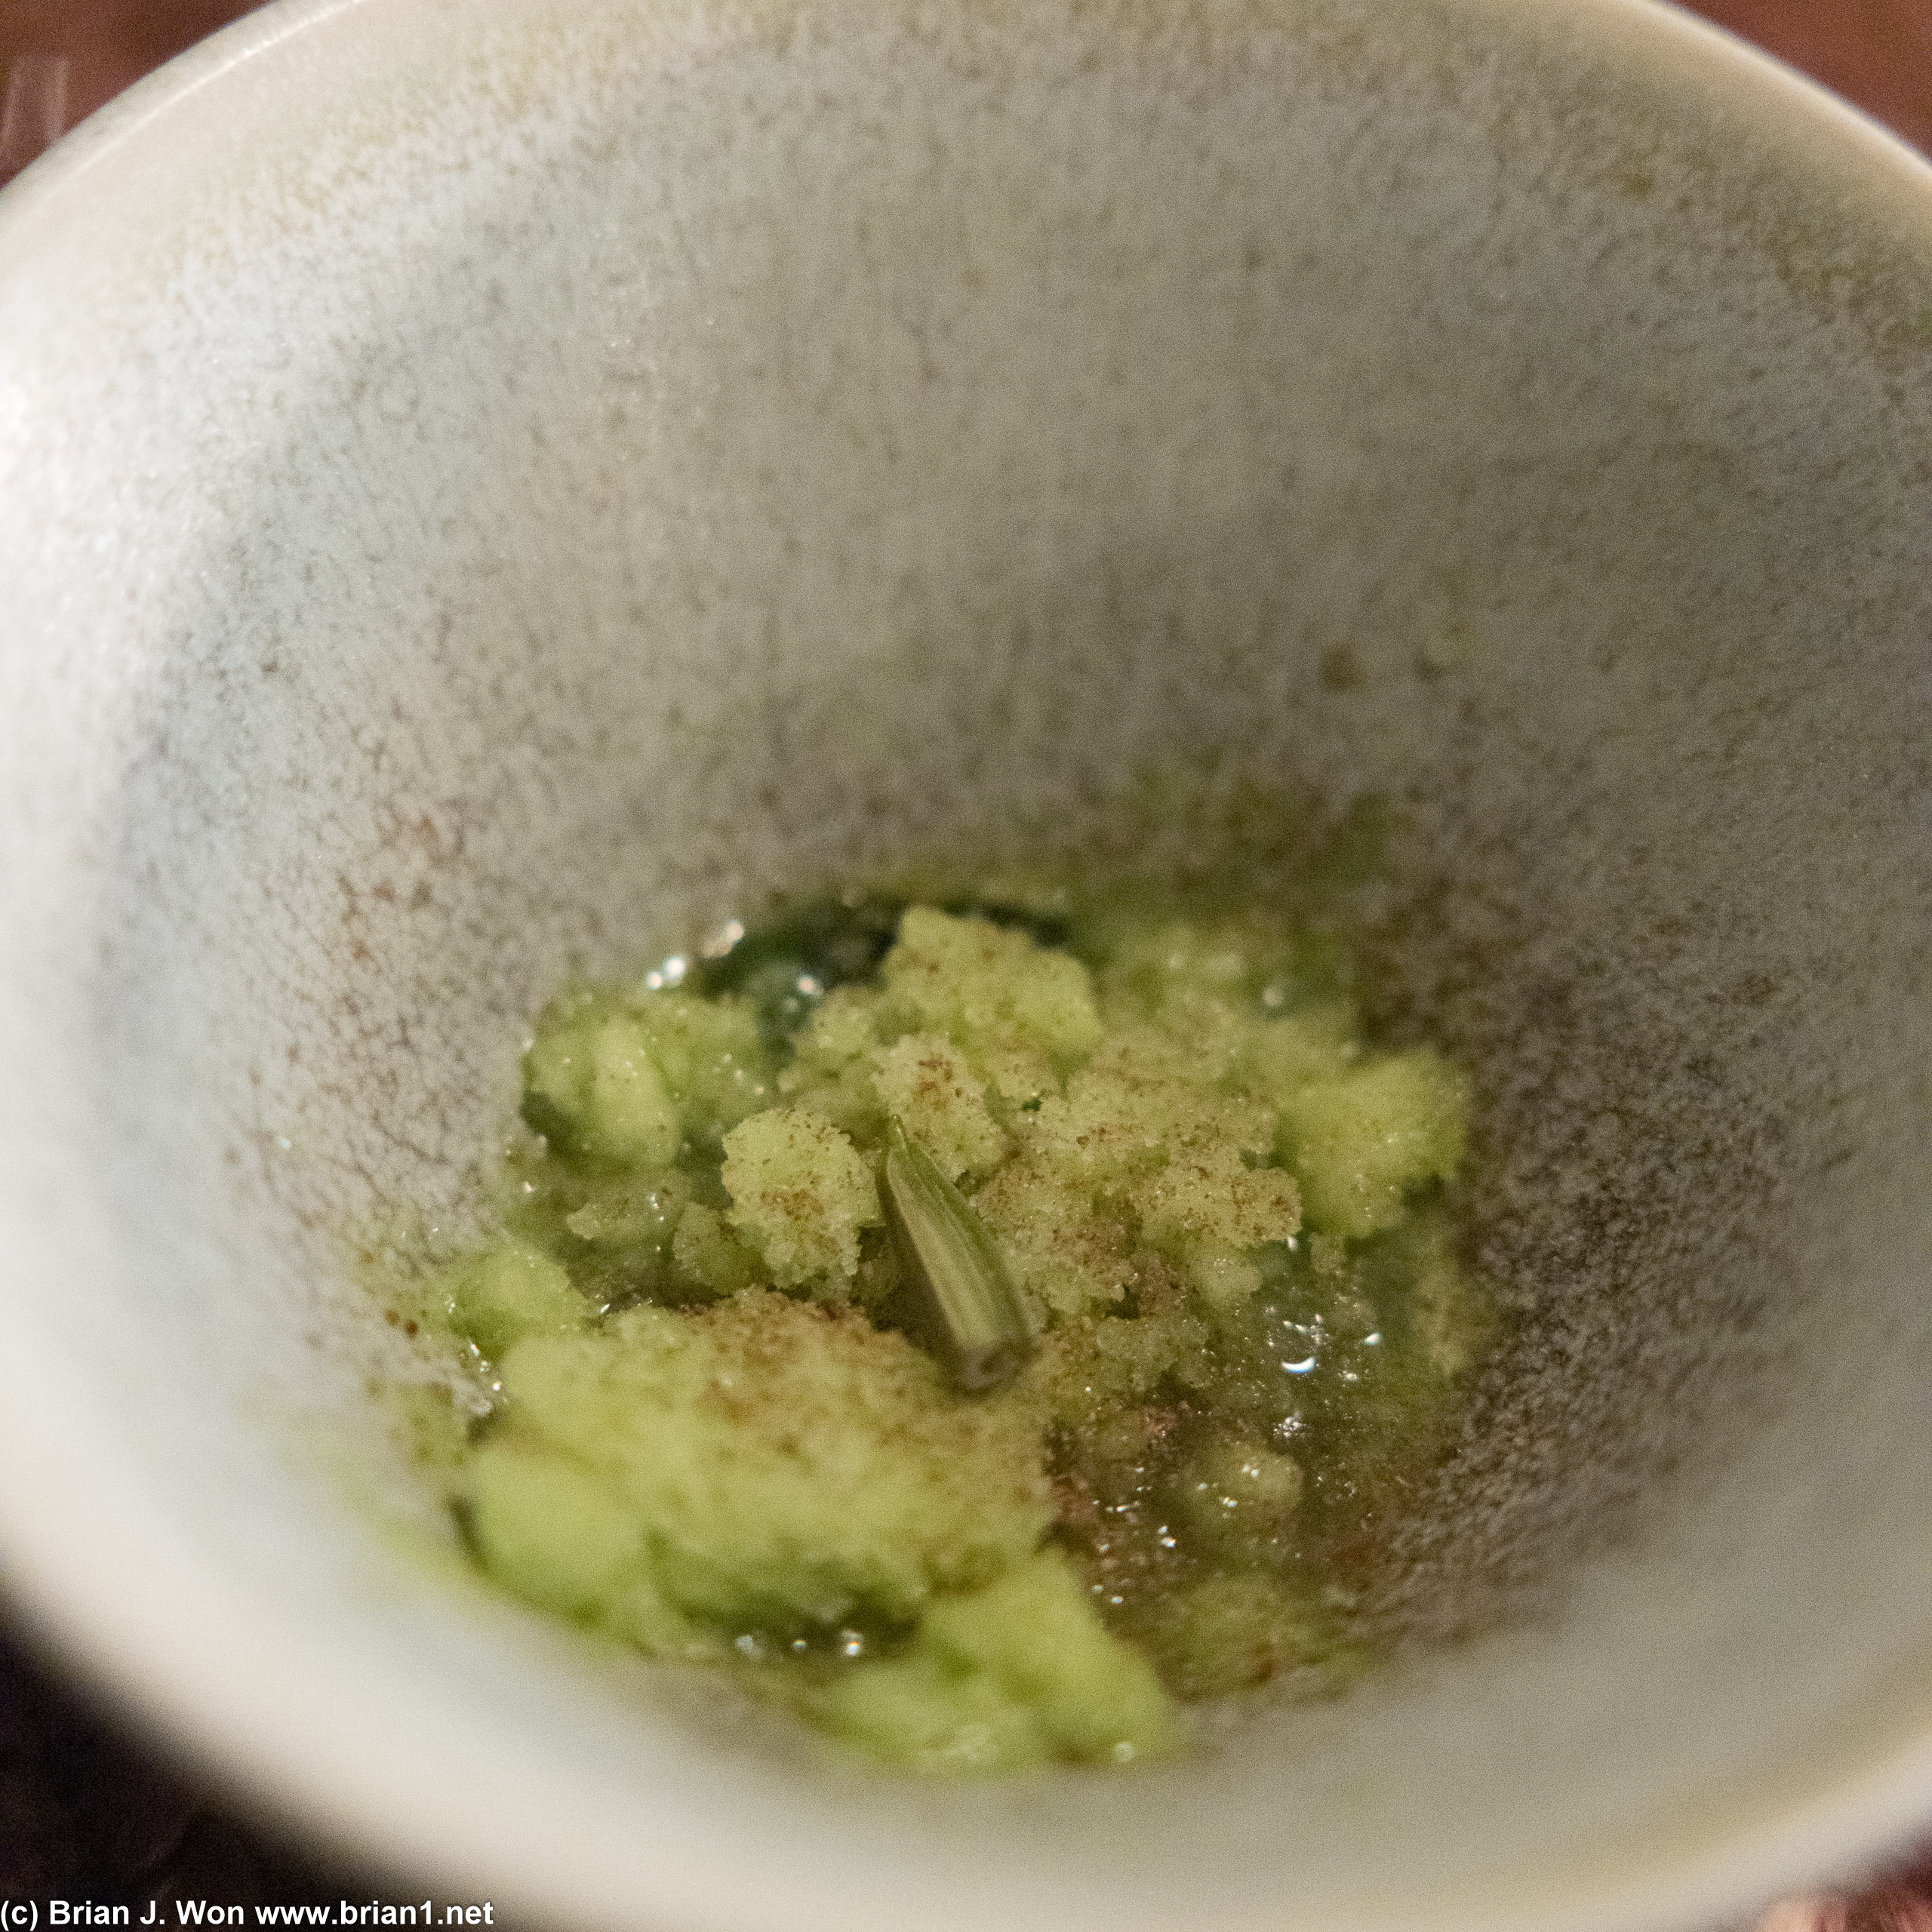 Cucumber, fermented tomato, and dill. Meant to refresh your palate?